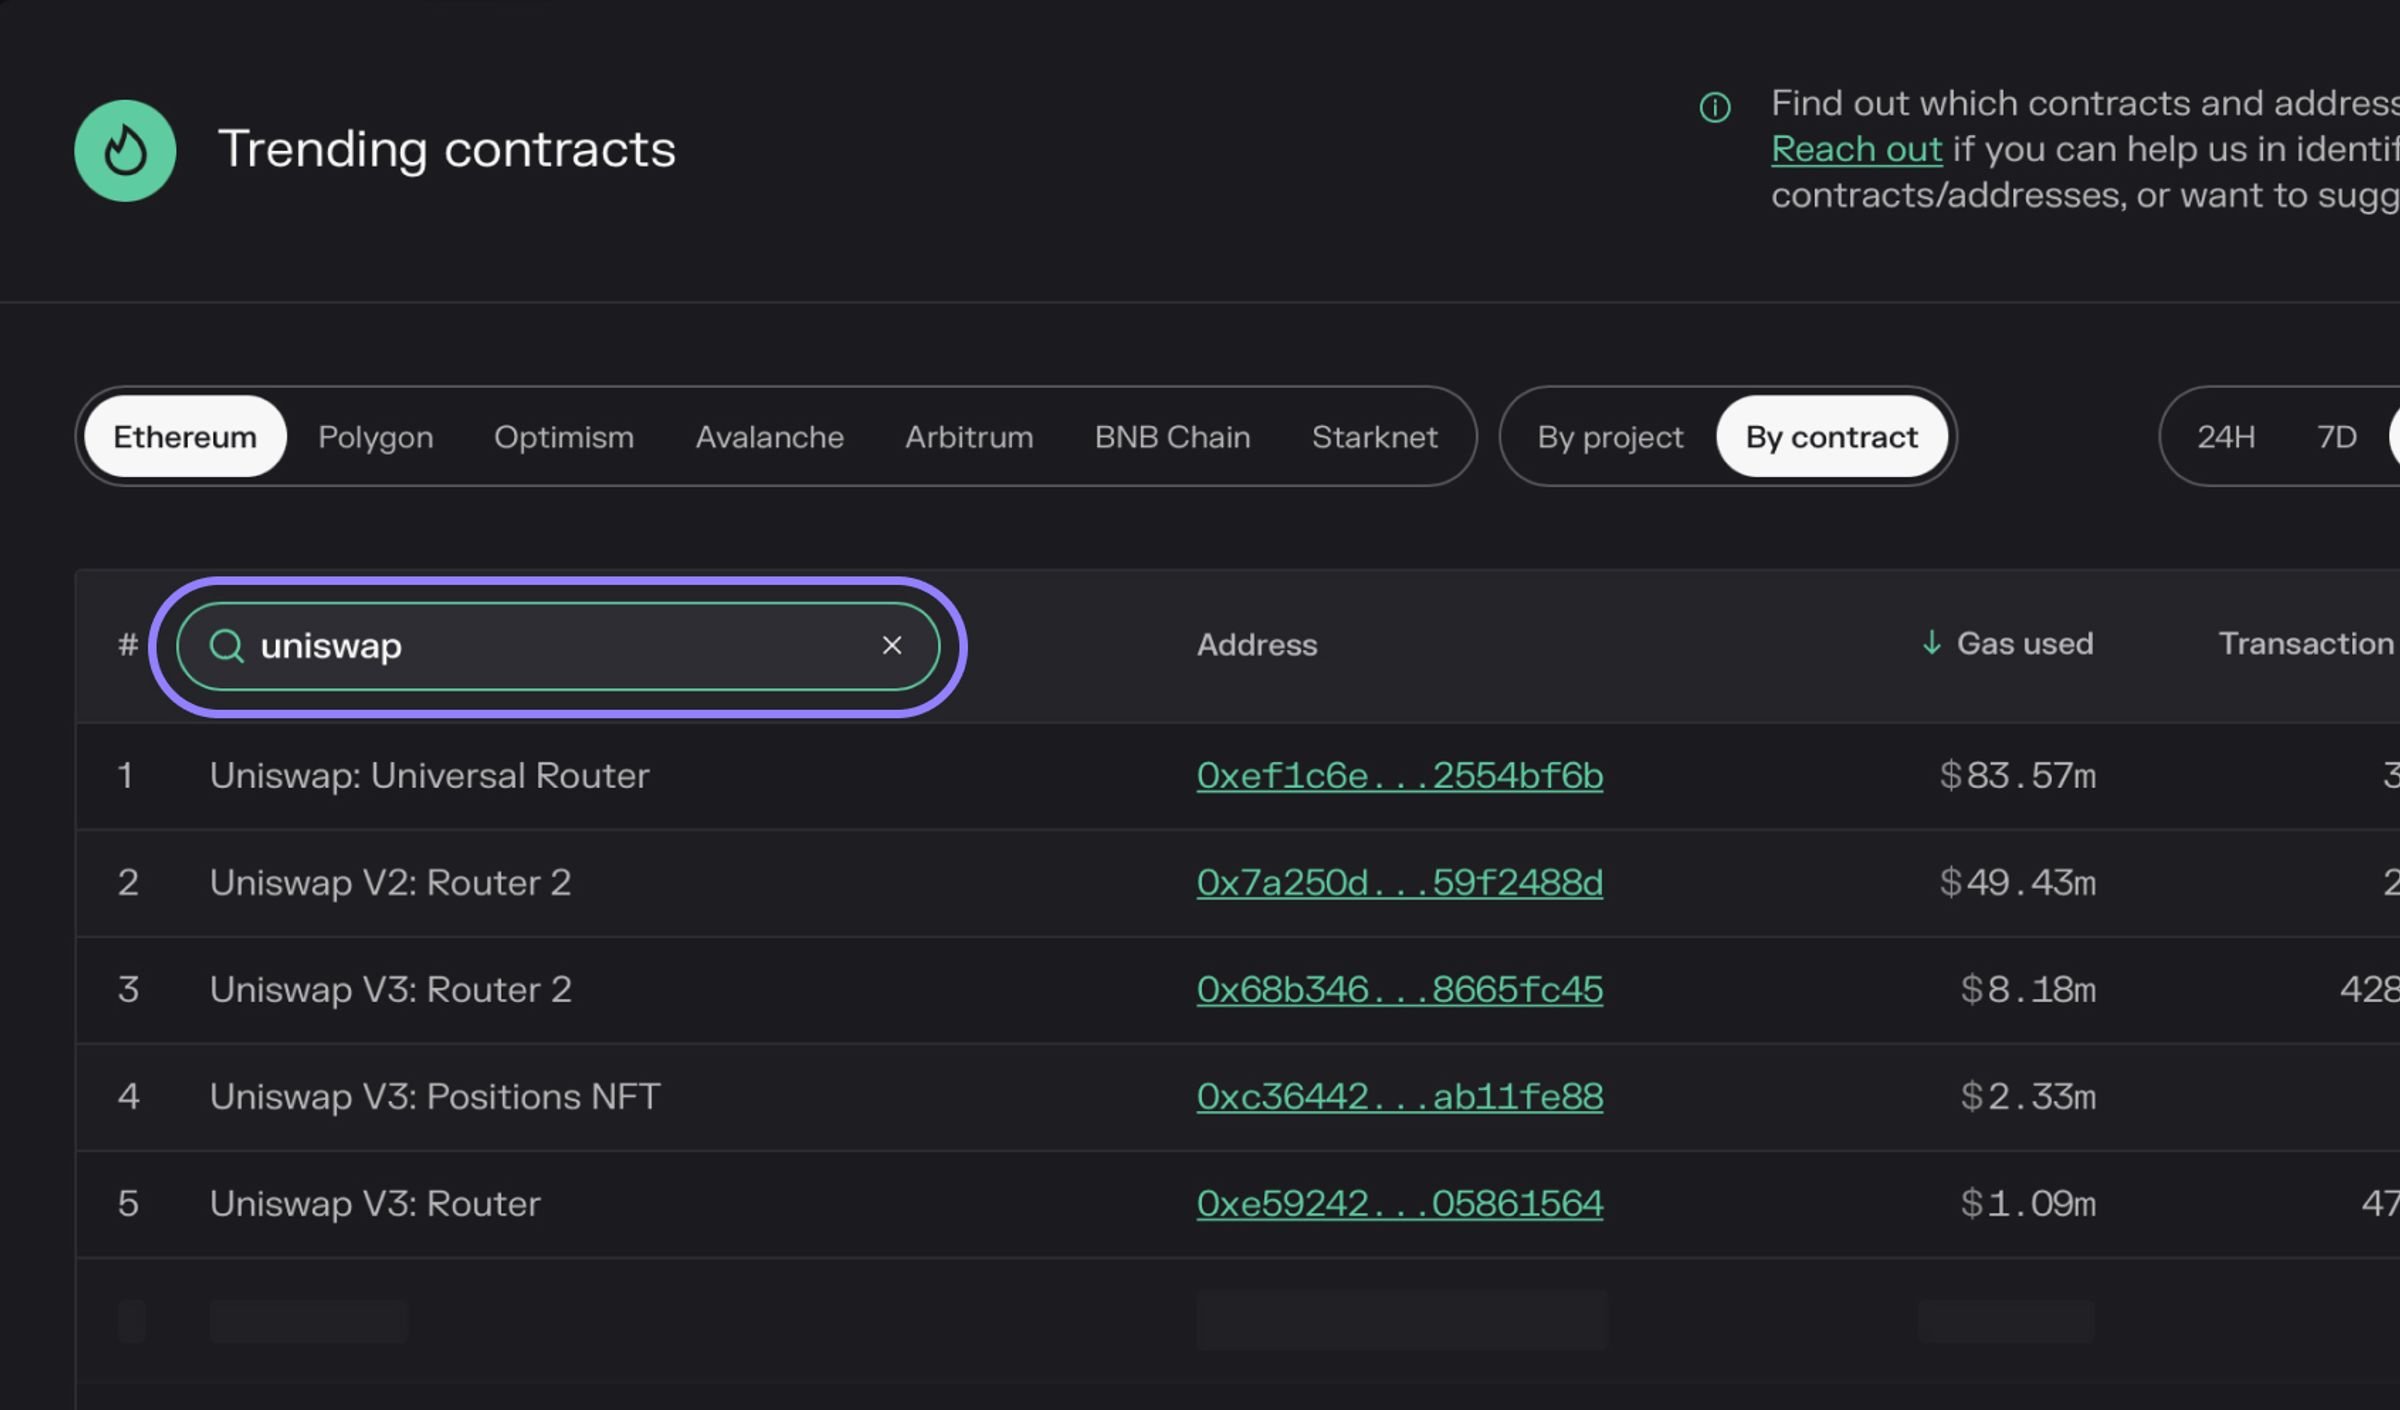 Screenshot from Trending contracts where the search field is active